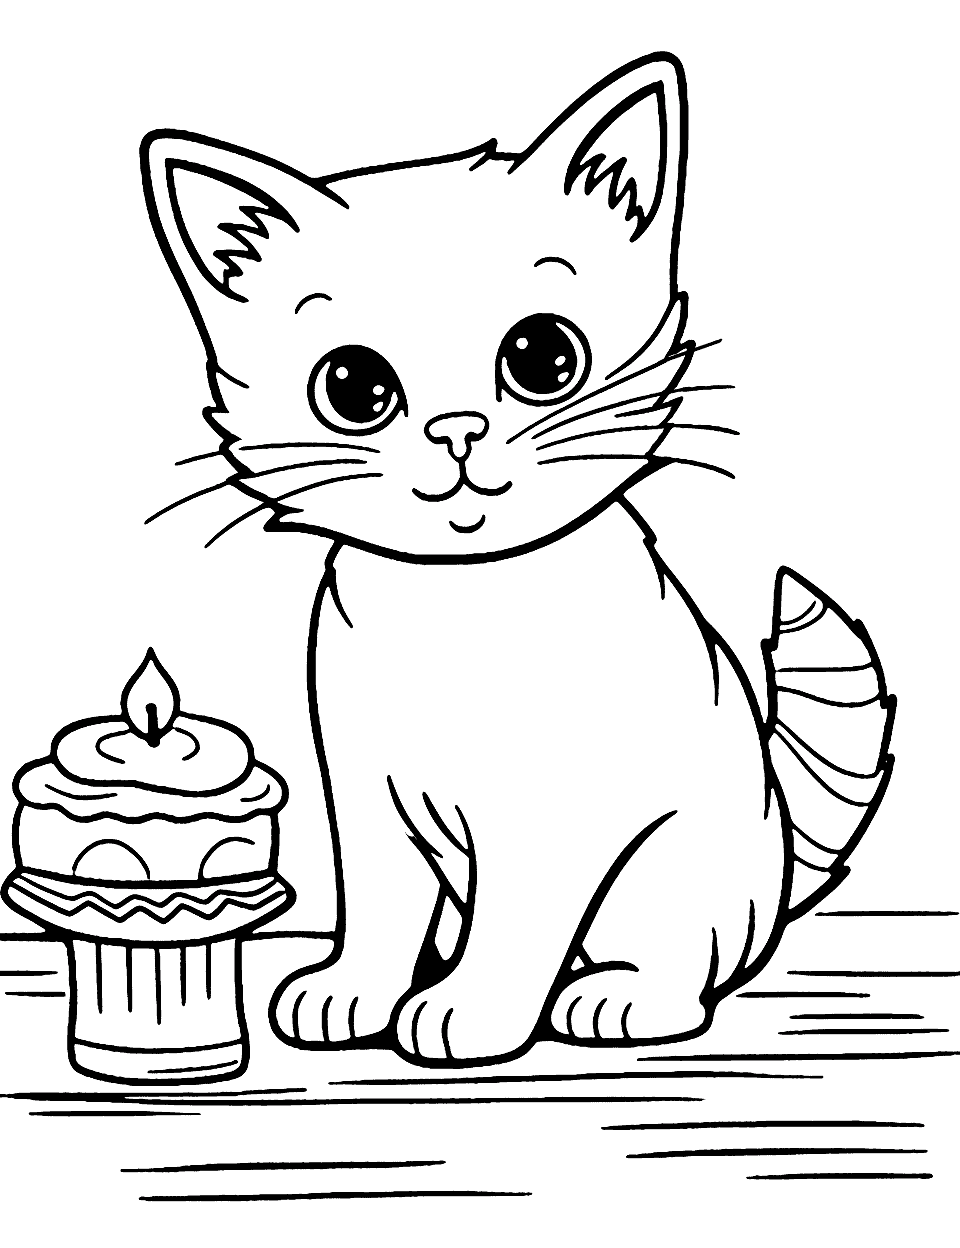 Birthday Cat With a Cake Coloring Page - A cat excitedly looking at a birthday cake with a candle on top.